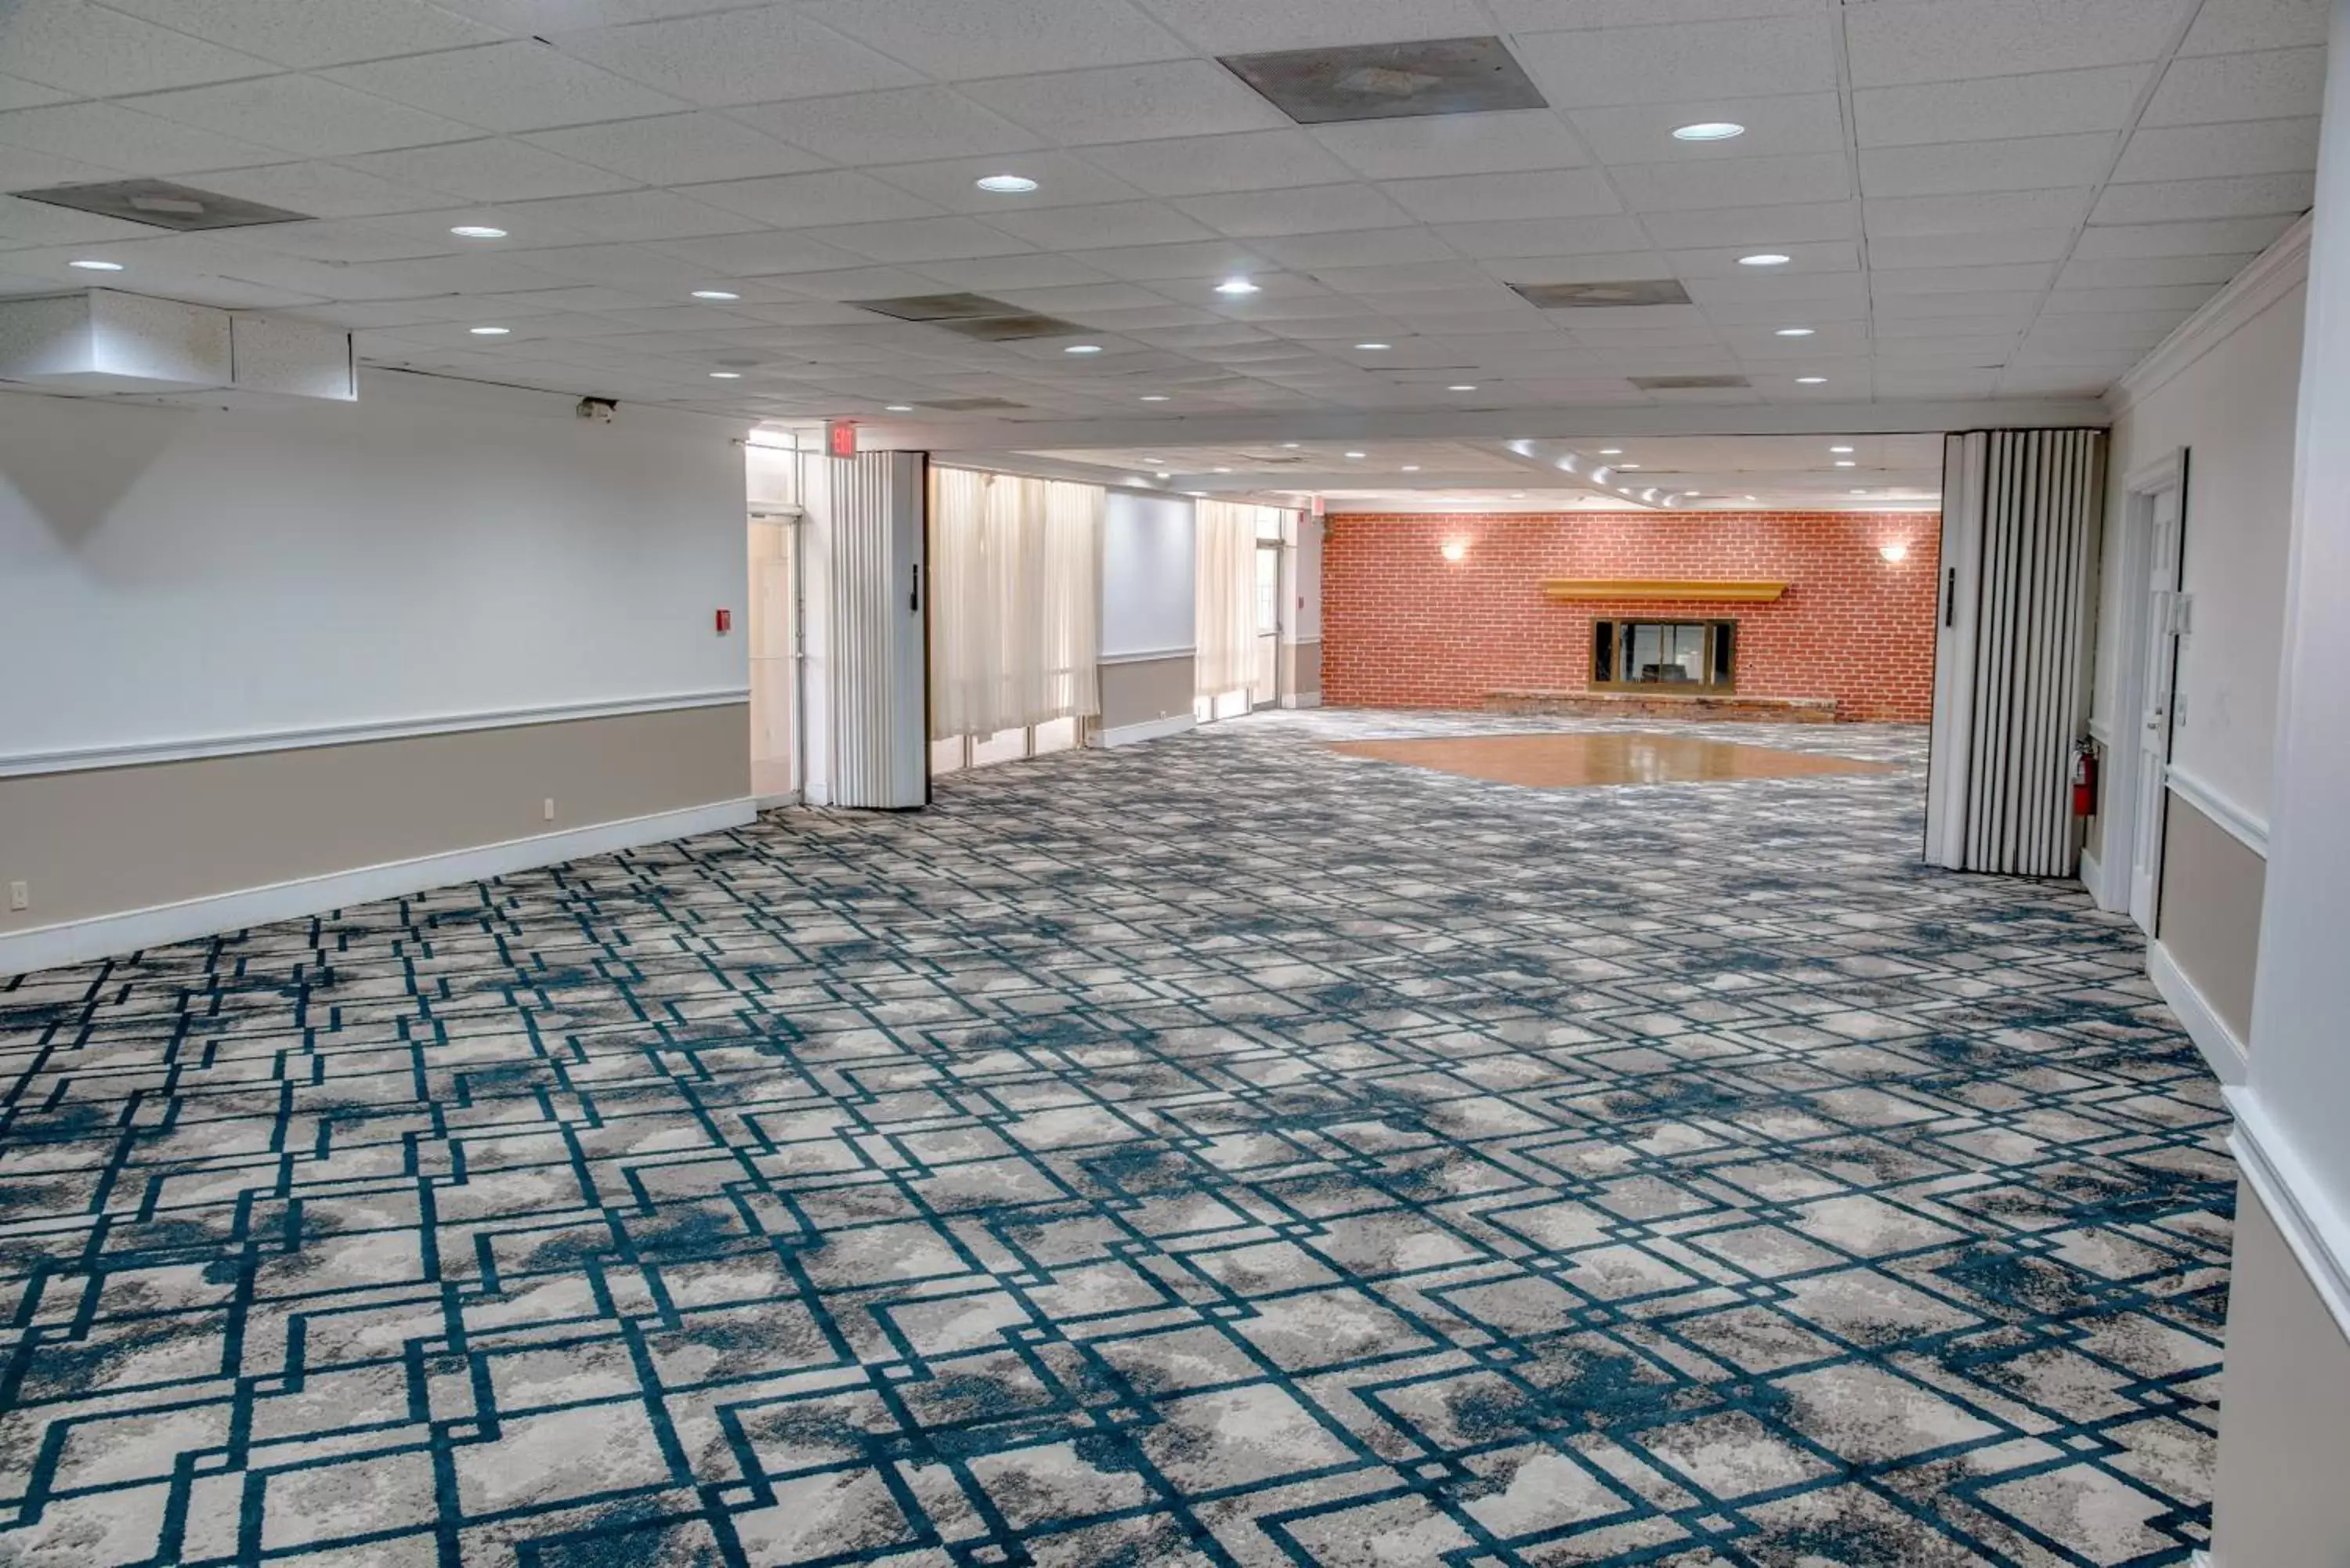 Banquet/Function facilities, Banquet Facilities in Days Inn by Wyndham St. Petersburg / Tampa Bay Area